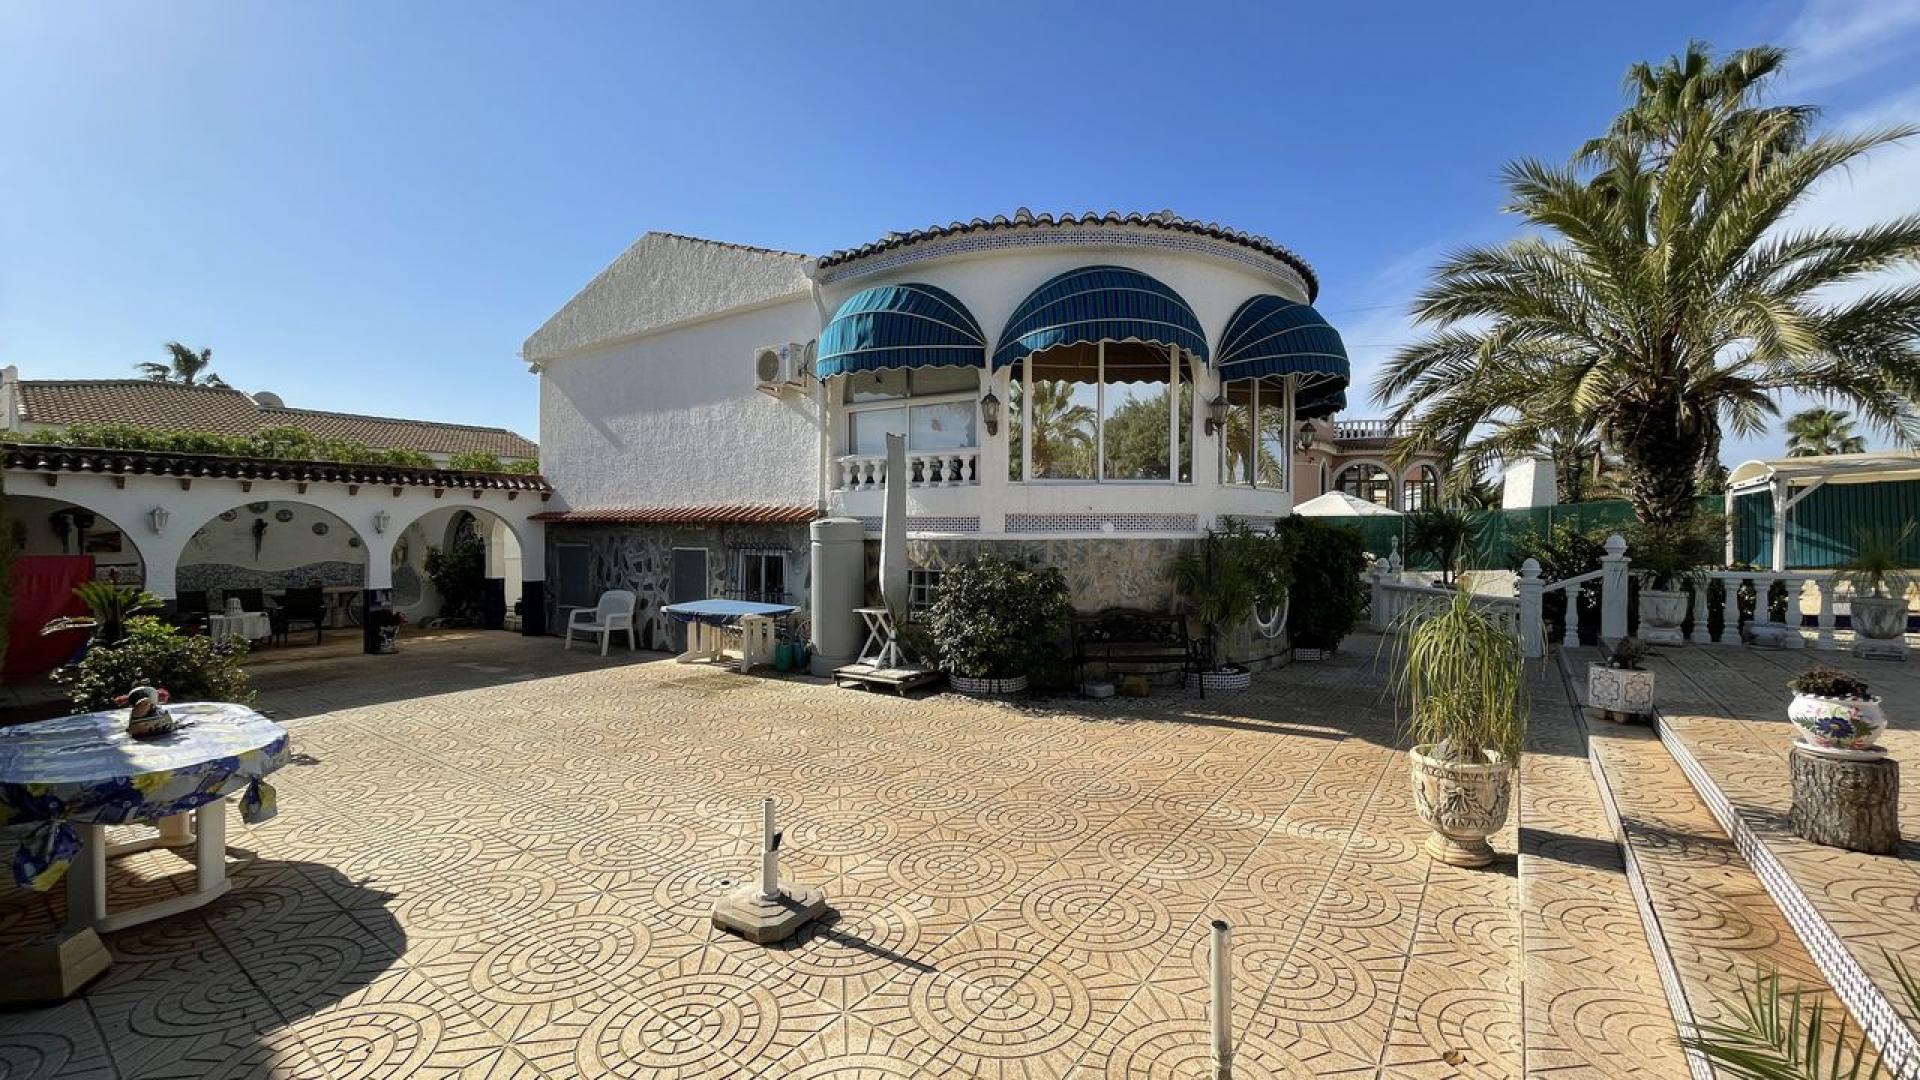 San Luis, Detached villa of 170m2 with a 985m2 plot and a 10x6 pool